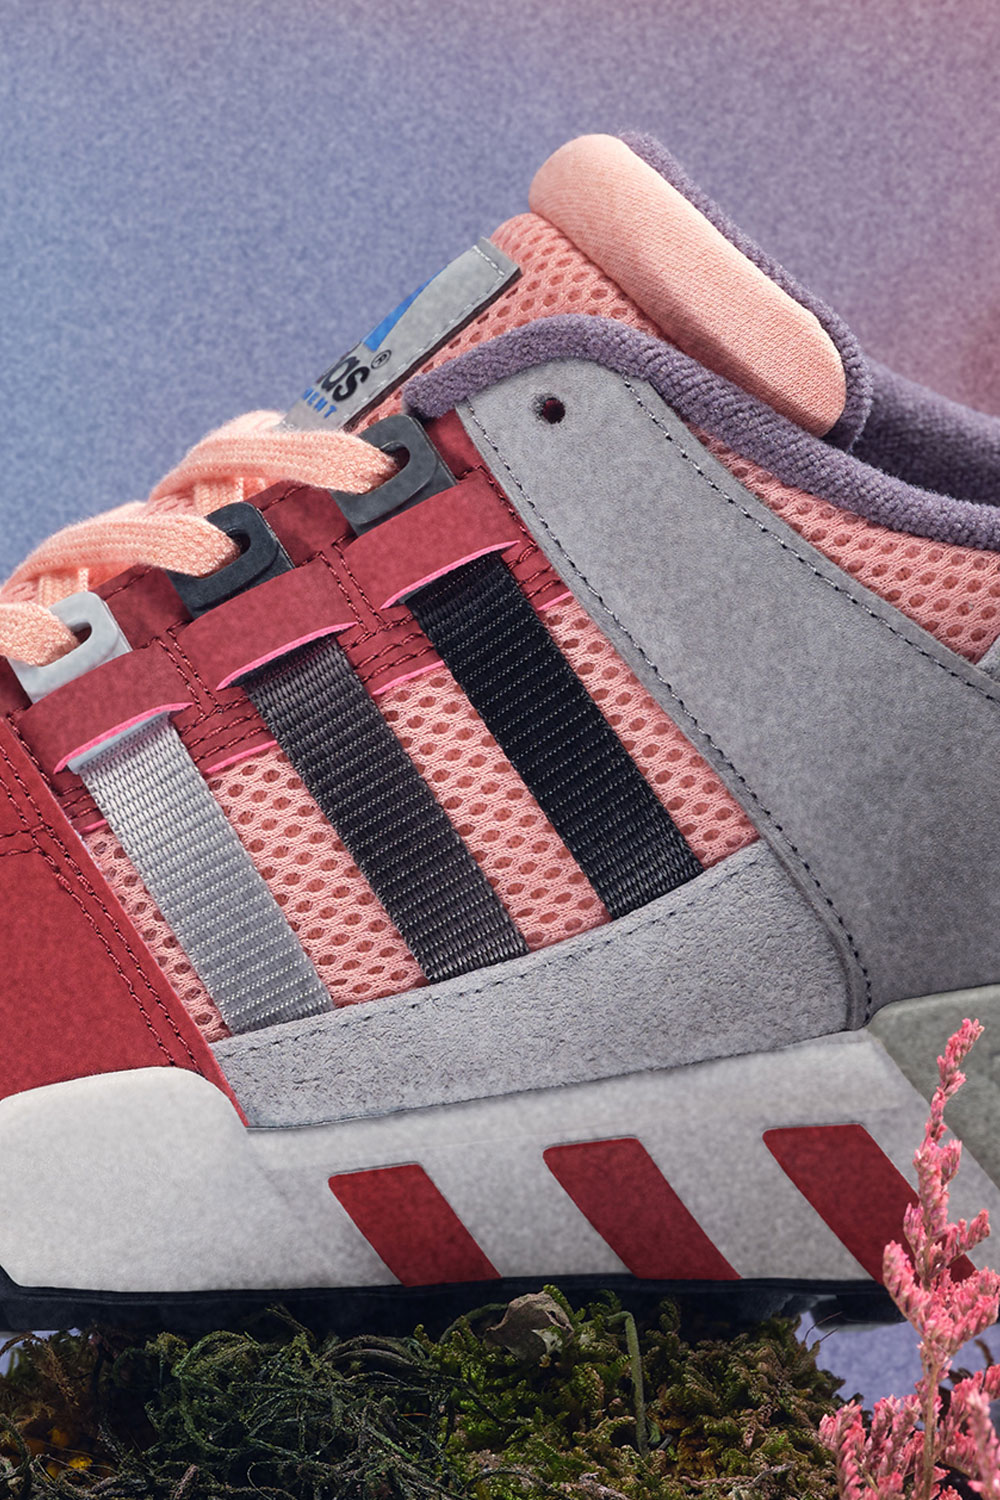 The adidas EQT Running Guidance 93 Primeknit Is Finally On Its Way